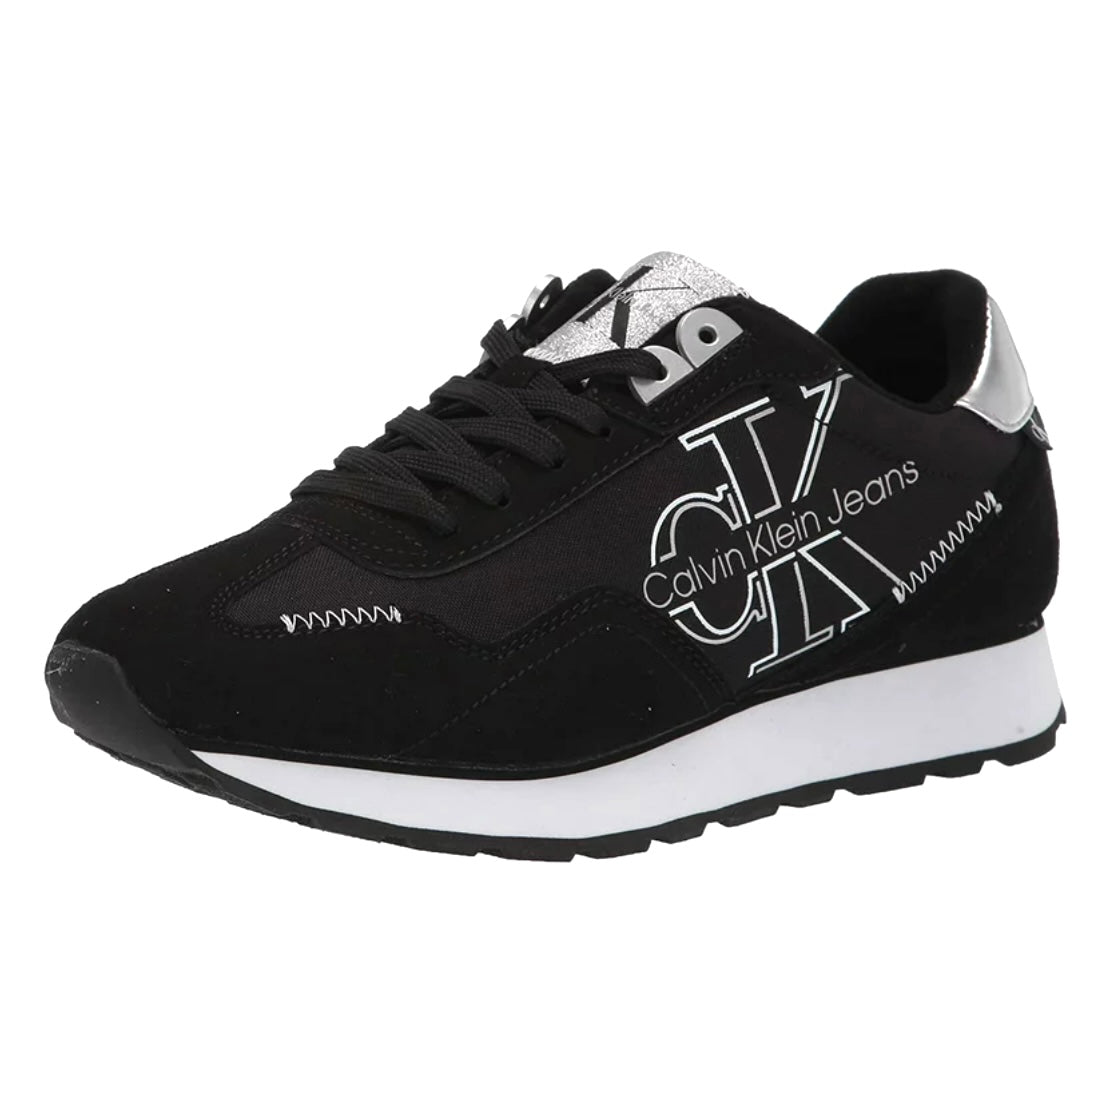 EDEN Black/Silver Lace-Up Round Toe Men's Sneakers